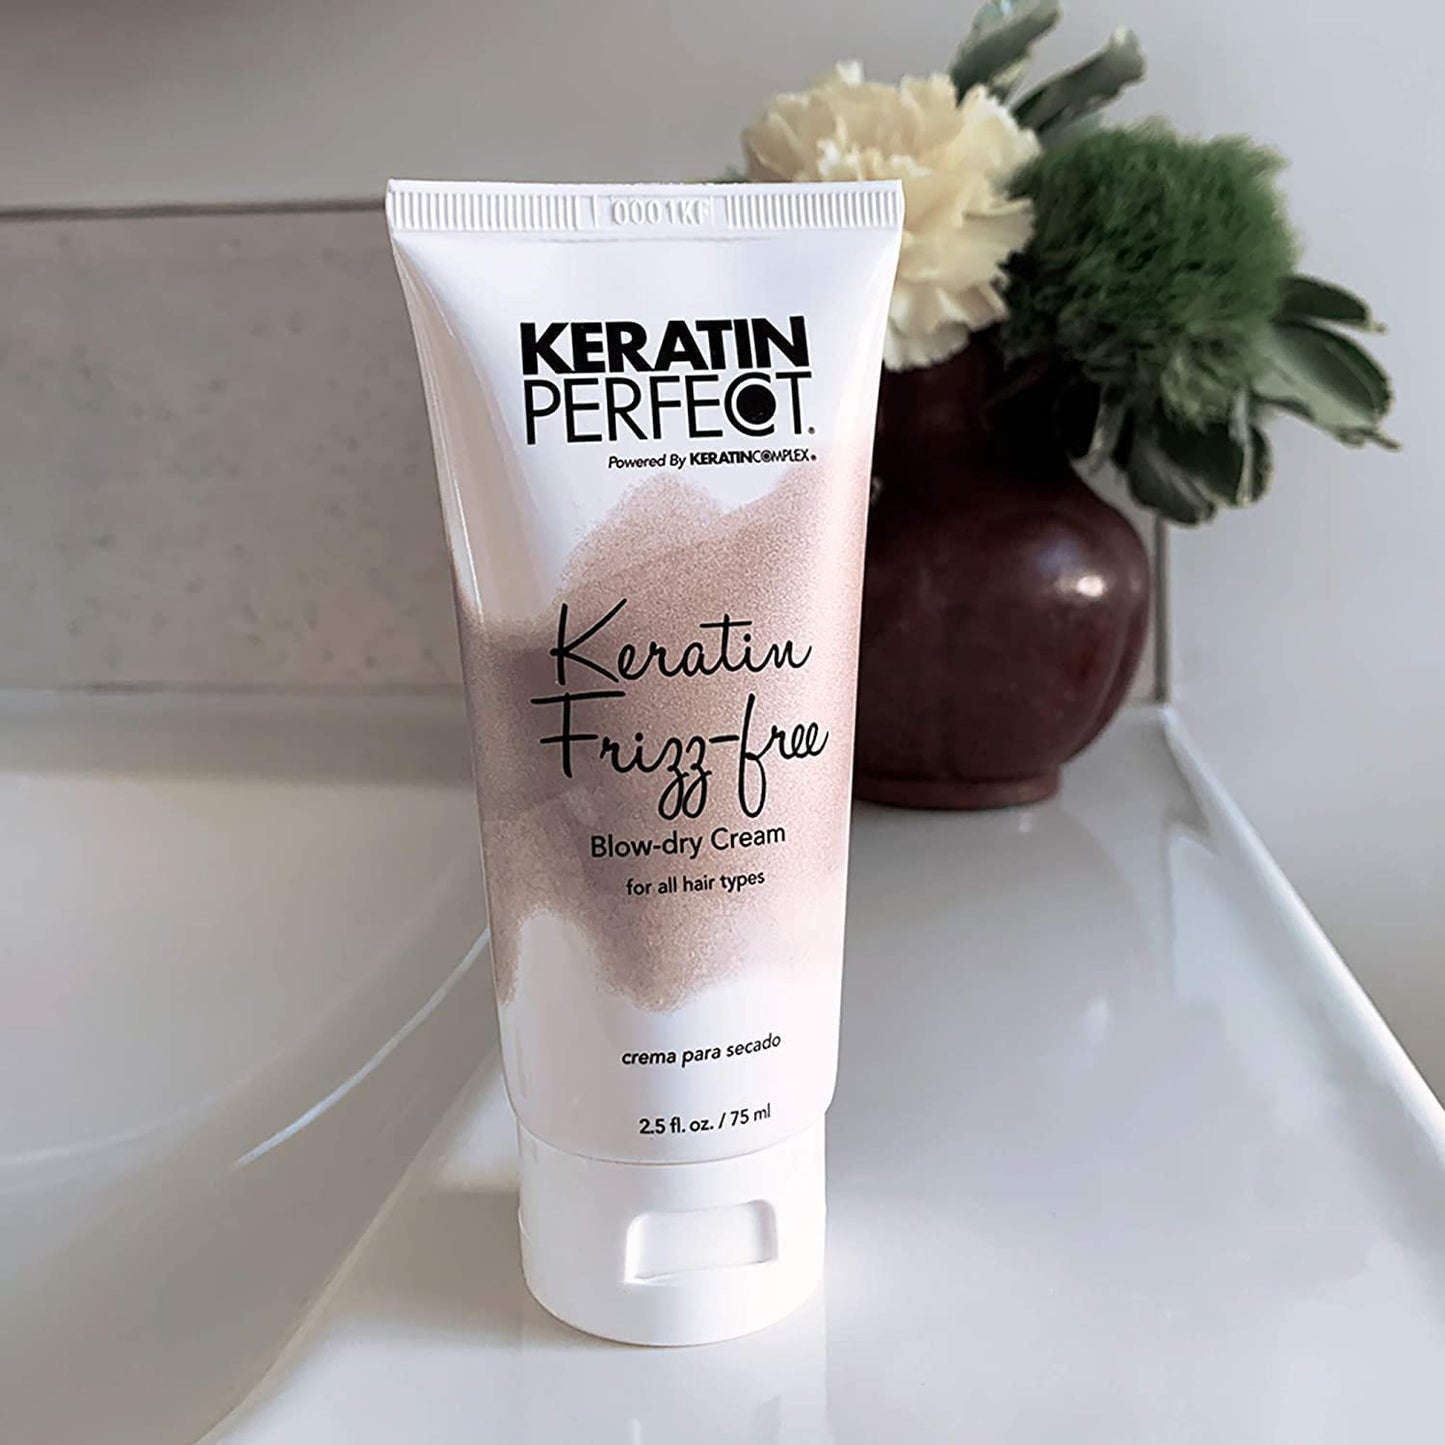 Keratin Perfect Frizz-Free Blow Dry Cream - Hair Treatment Made With Natural And Clean Ingredients - Helps Restore Shine And Smoothness - Ultra Revitalizing Serum Makes Hair More Manageable - 2.5 Oz